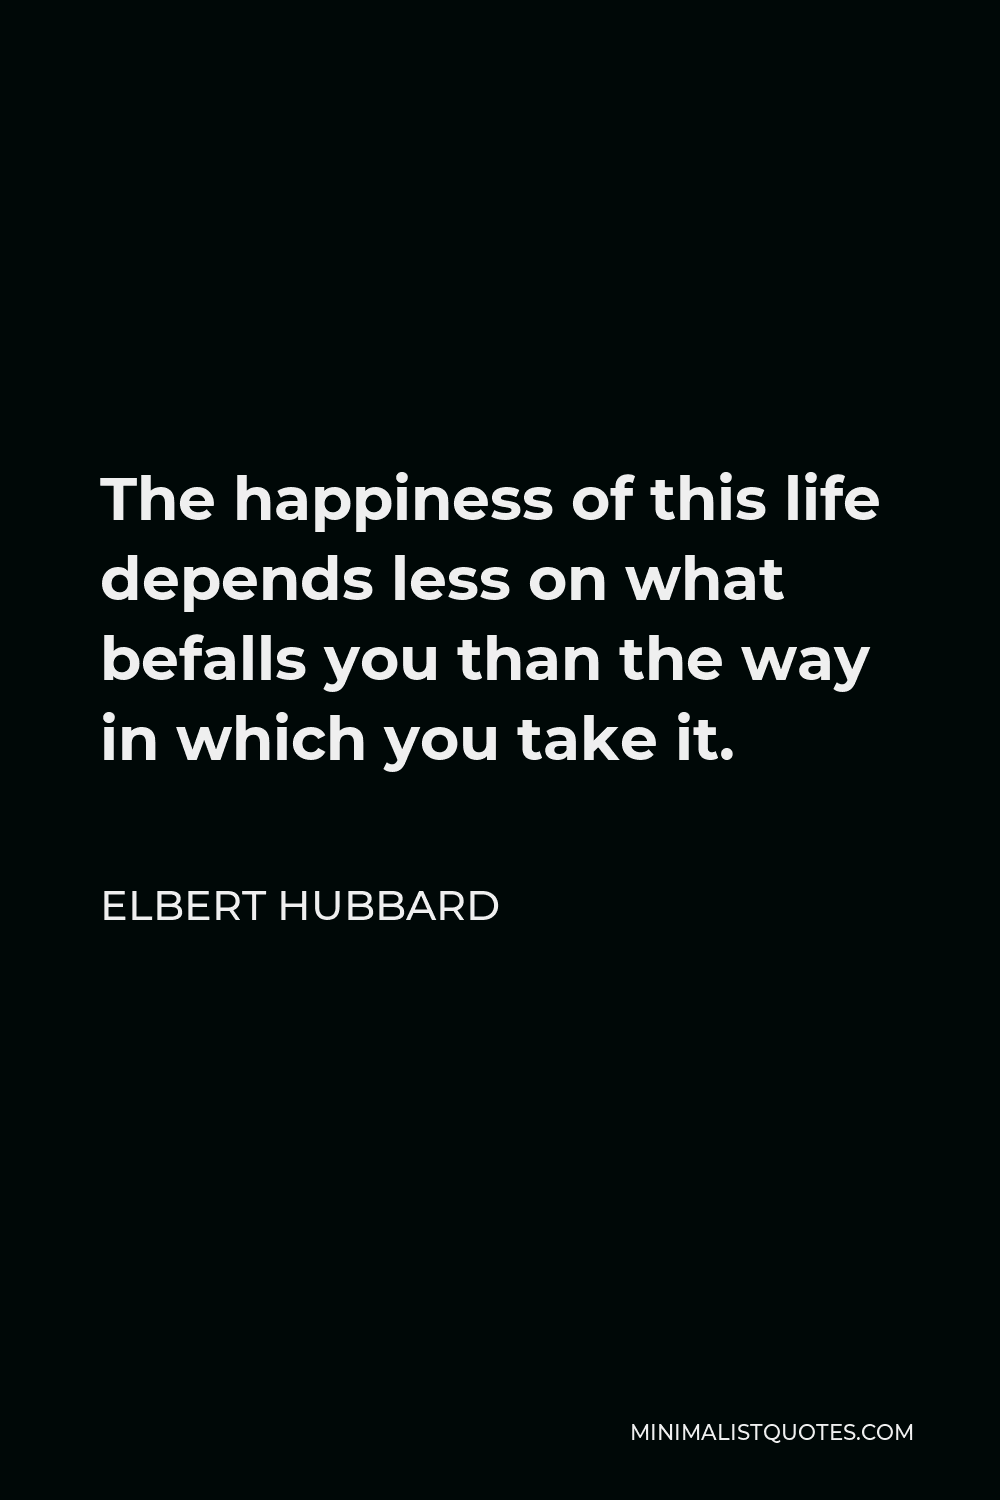 Elbert Hubbard Quote - The happiness of this life depends less on what befalls you than the way in which you take it.